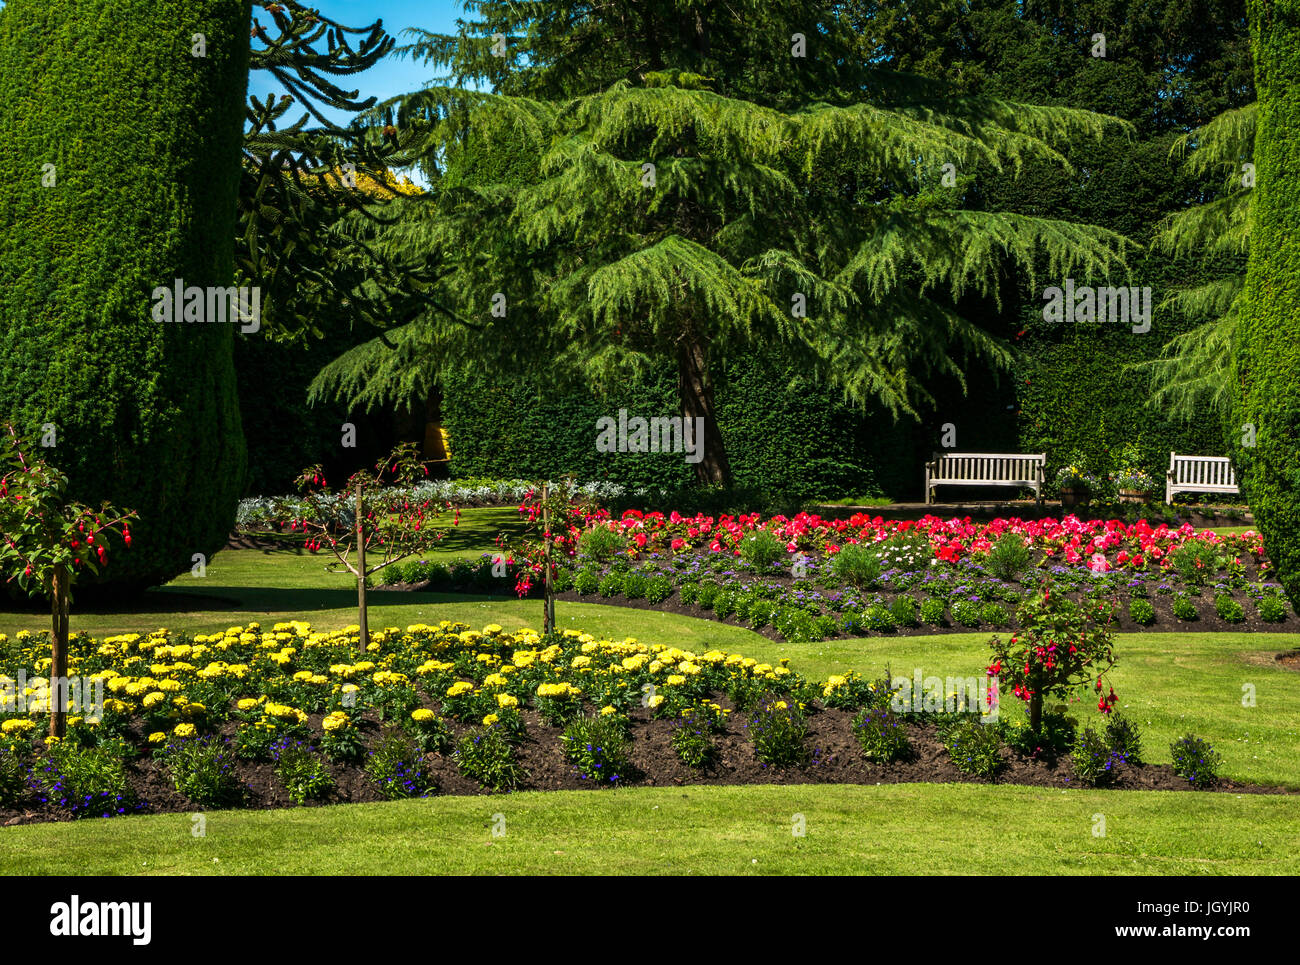 Formal planted flowerbeds and topiary yew trees at Dirleton Castle gardens, Dirleton, East Lothian, Scotland, UK Stock Photo